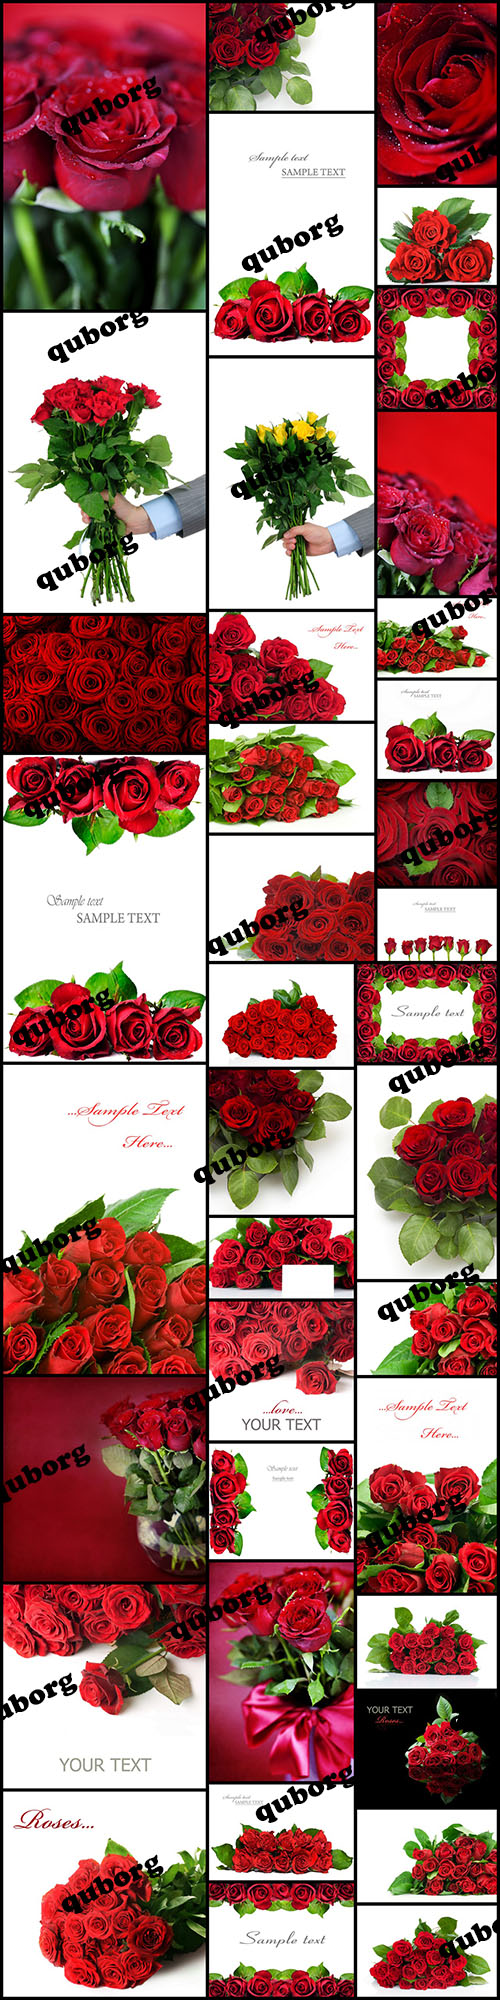 Stock Photos - Red Roses